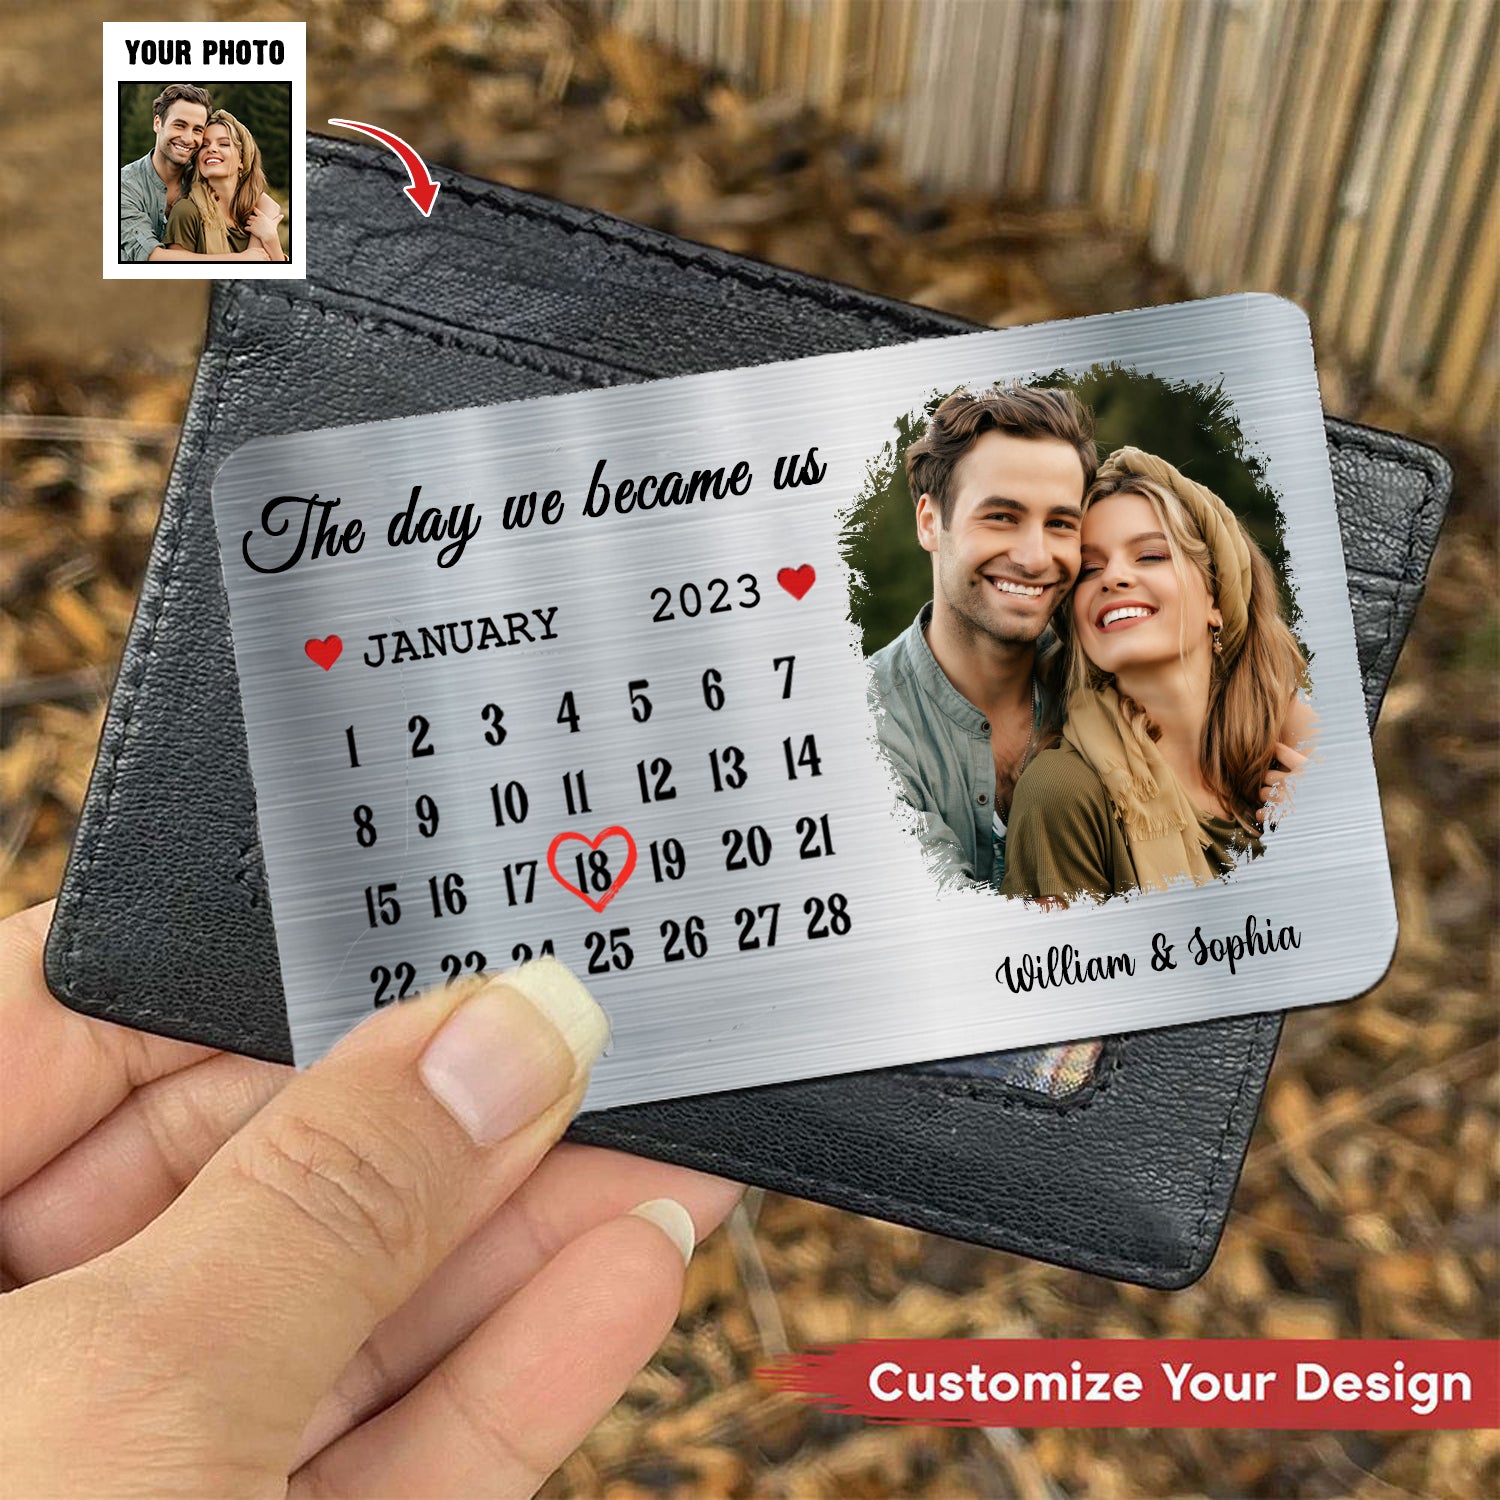 The Day We Became Us - Couple Personalized Aluminum Wallet Card - Gift For Husband Wife, Anniversary